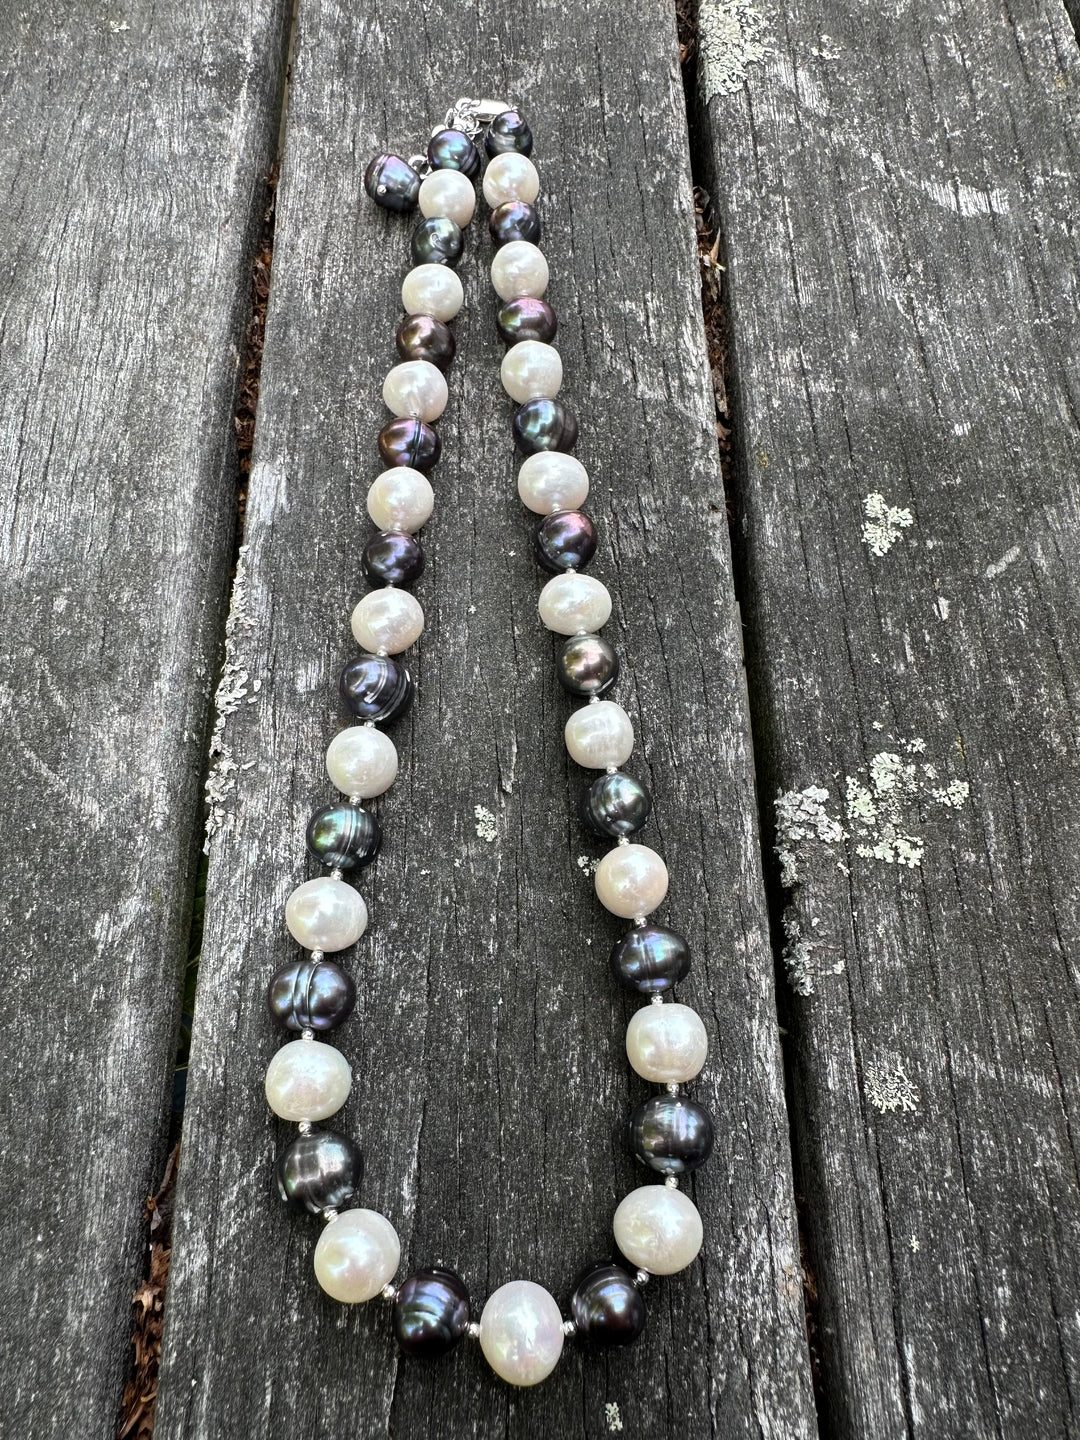 Large white and peacock freshwater pearl necklace